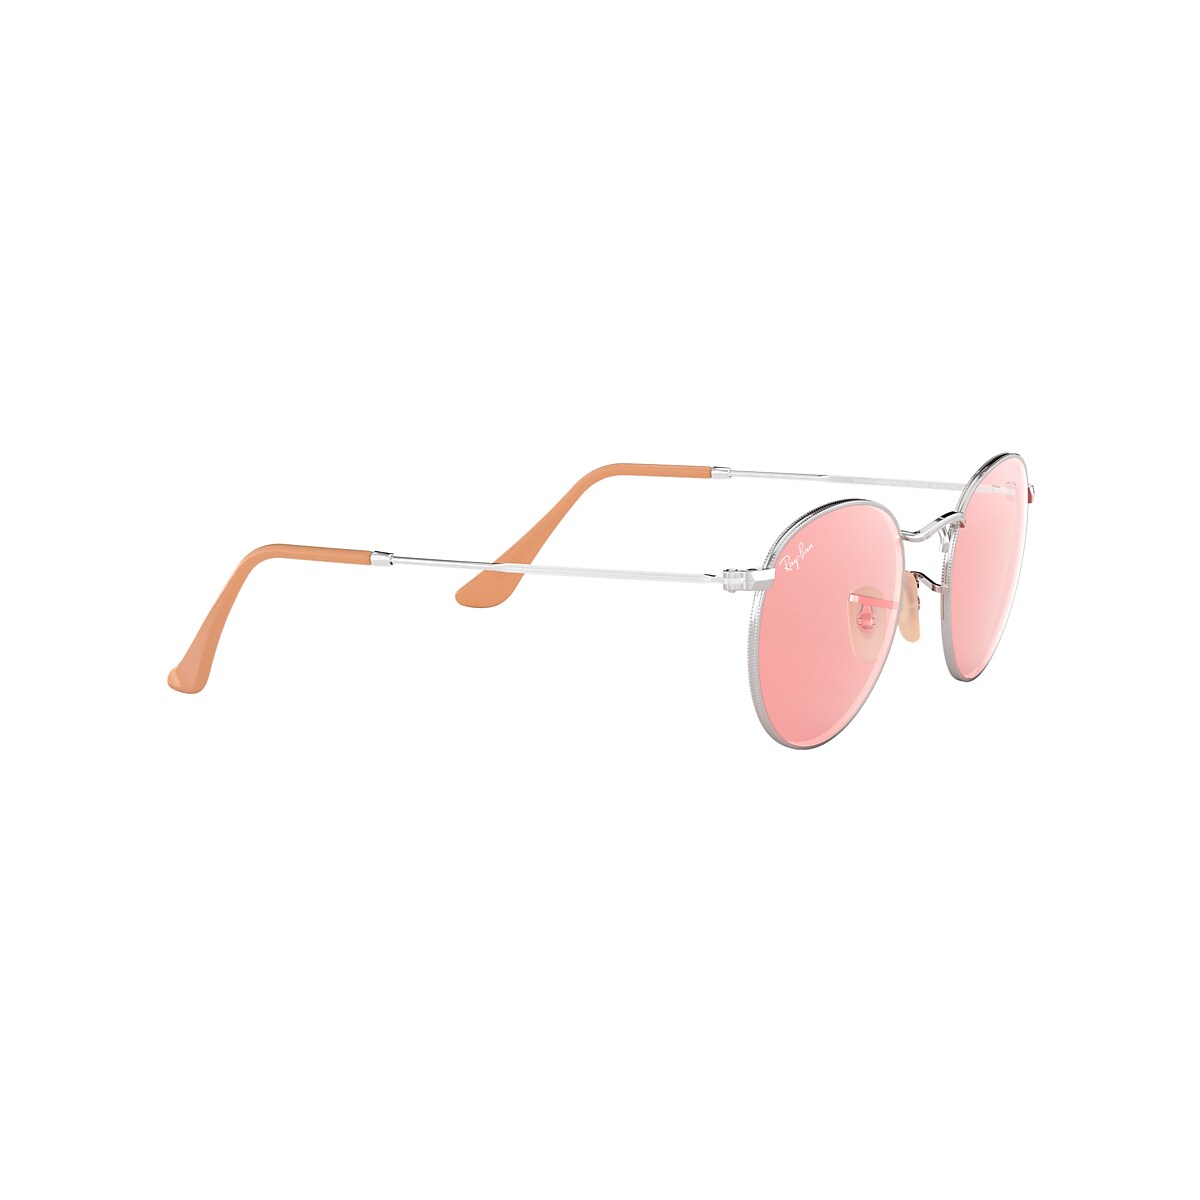 Round Washed Evolve Sunglasses in Silver and Pink Photochromic 